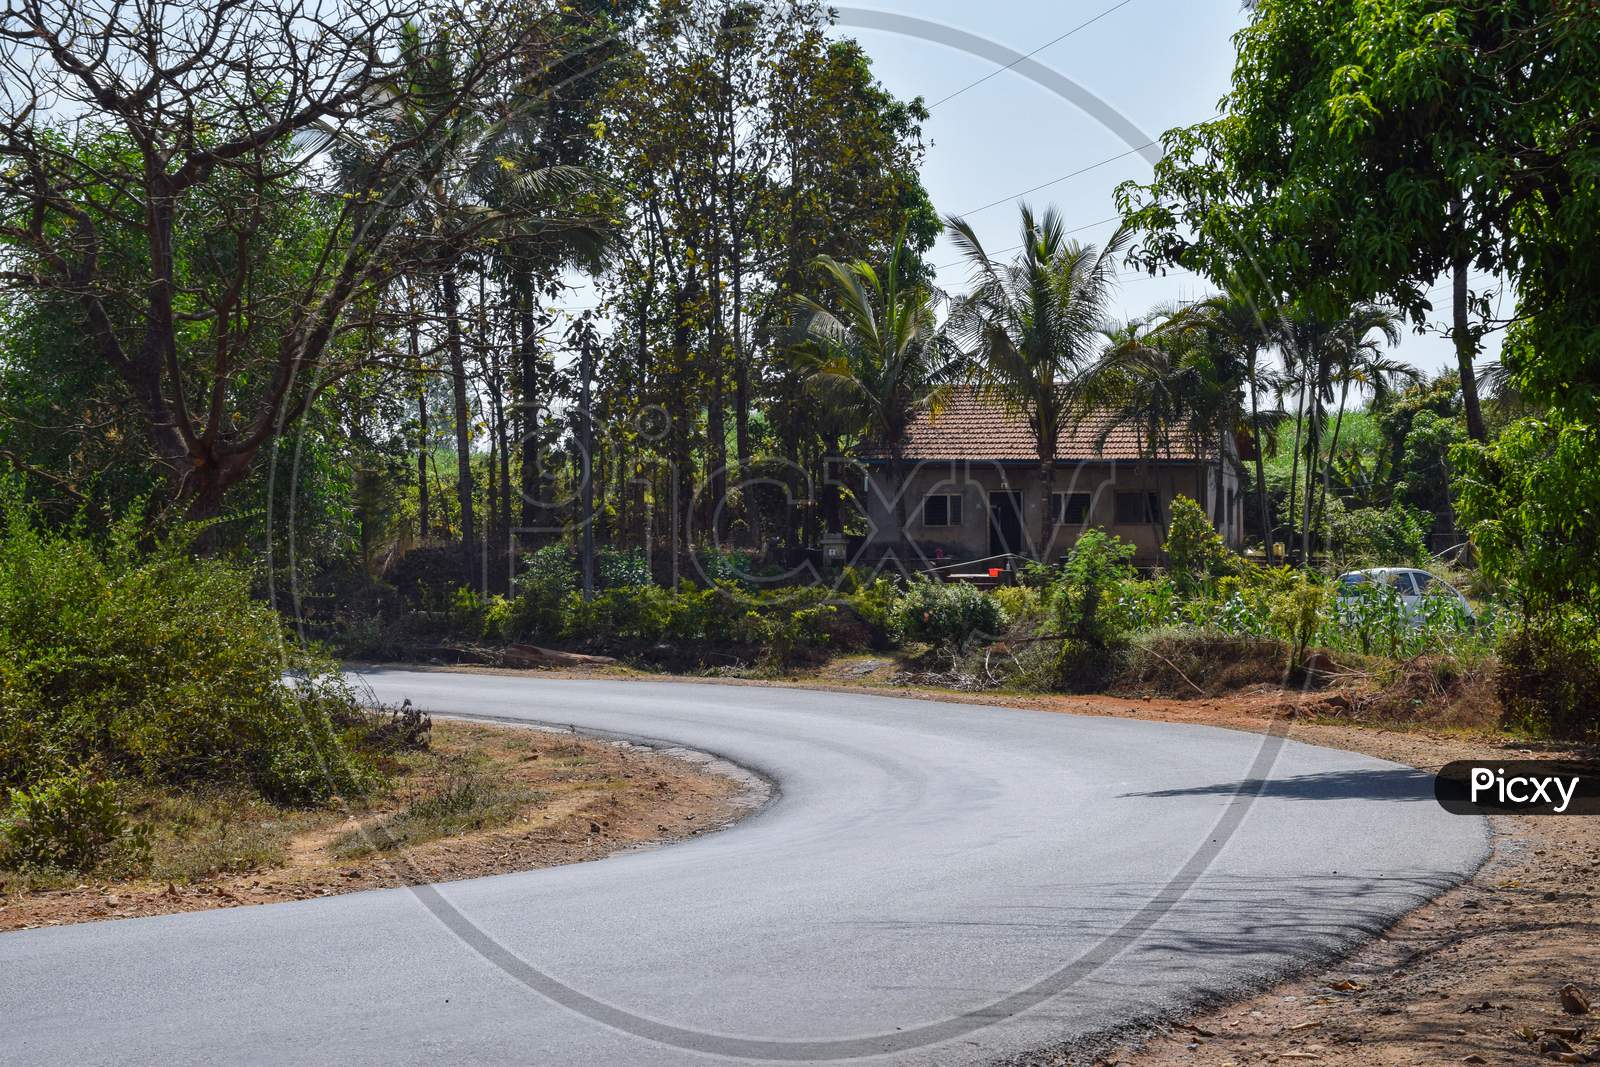 Picture Of Curved Empty Asphalt Road Shining In Afternoon Bright Sunlight Covered With Green Trees. Small Farmhouse Constructed Using Clay Made Roof Tiles Beside The Road At Kolhapur City Maharashtra India.